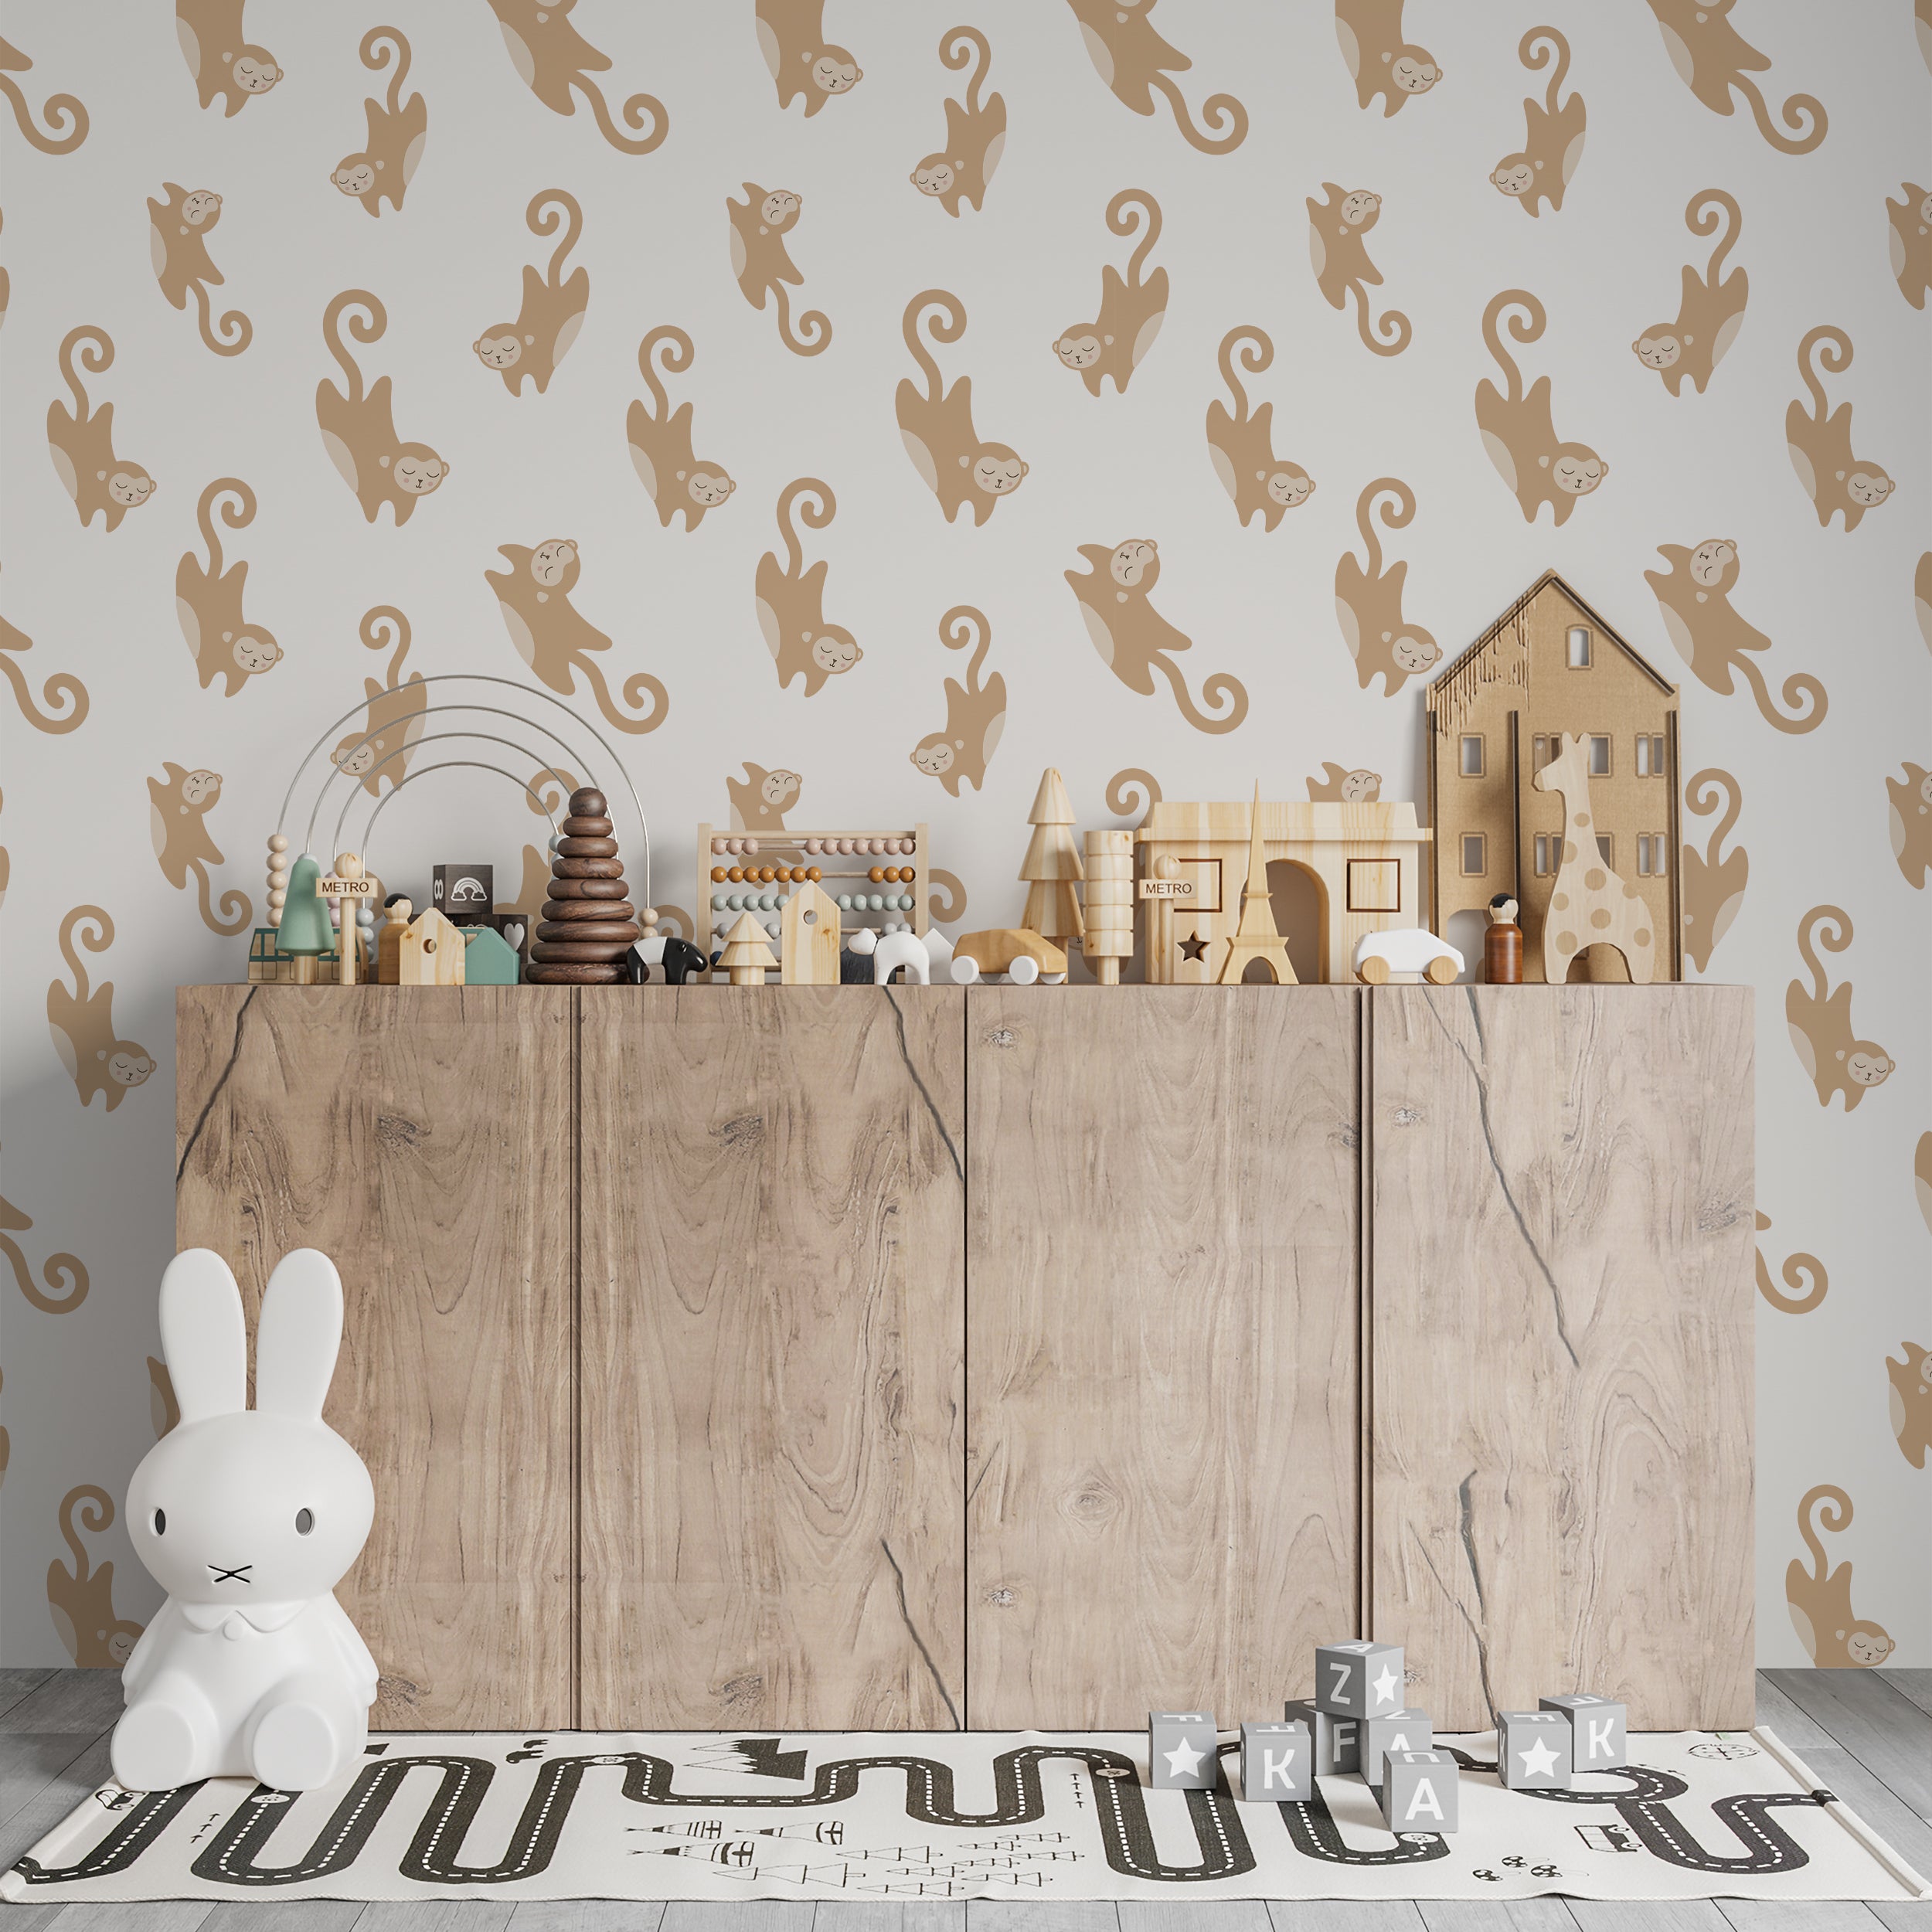 A children's playroom wall adorned with Cute Monkey Wallpaper, creating a lively and fun atmosphere. The wallpaper's beige and taupe monkey designs contrast beautifully against the wooden toy storage and colorful toys.